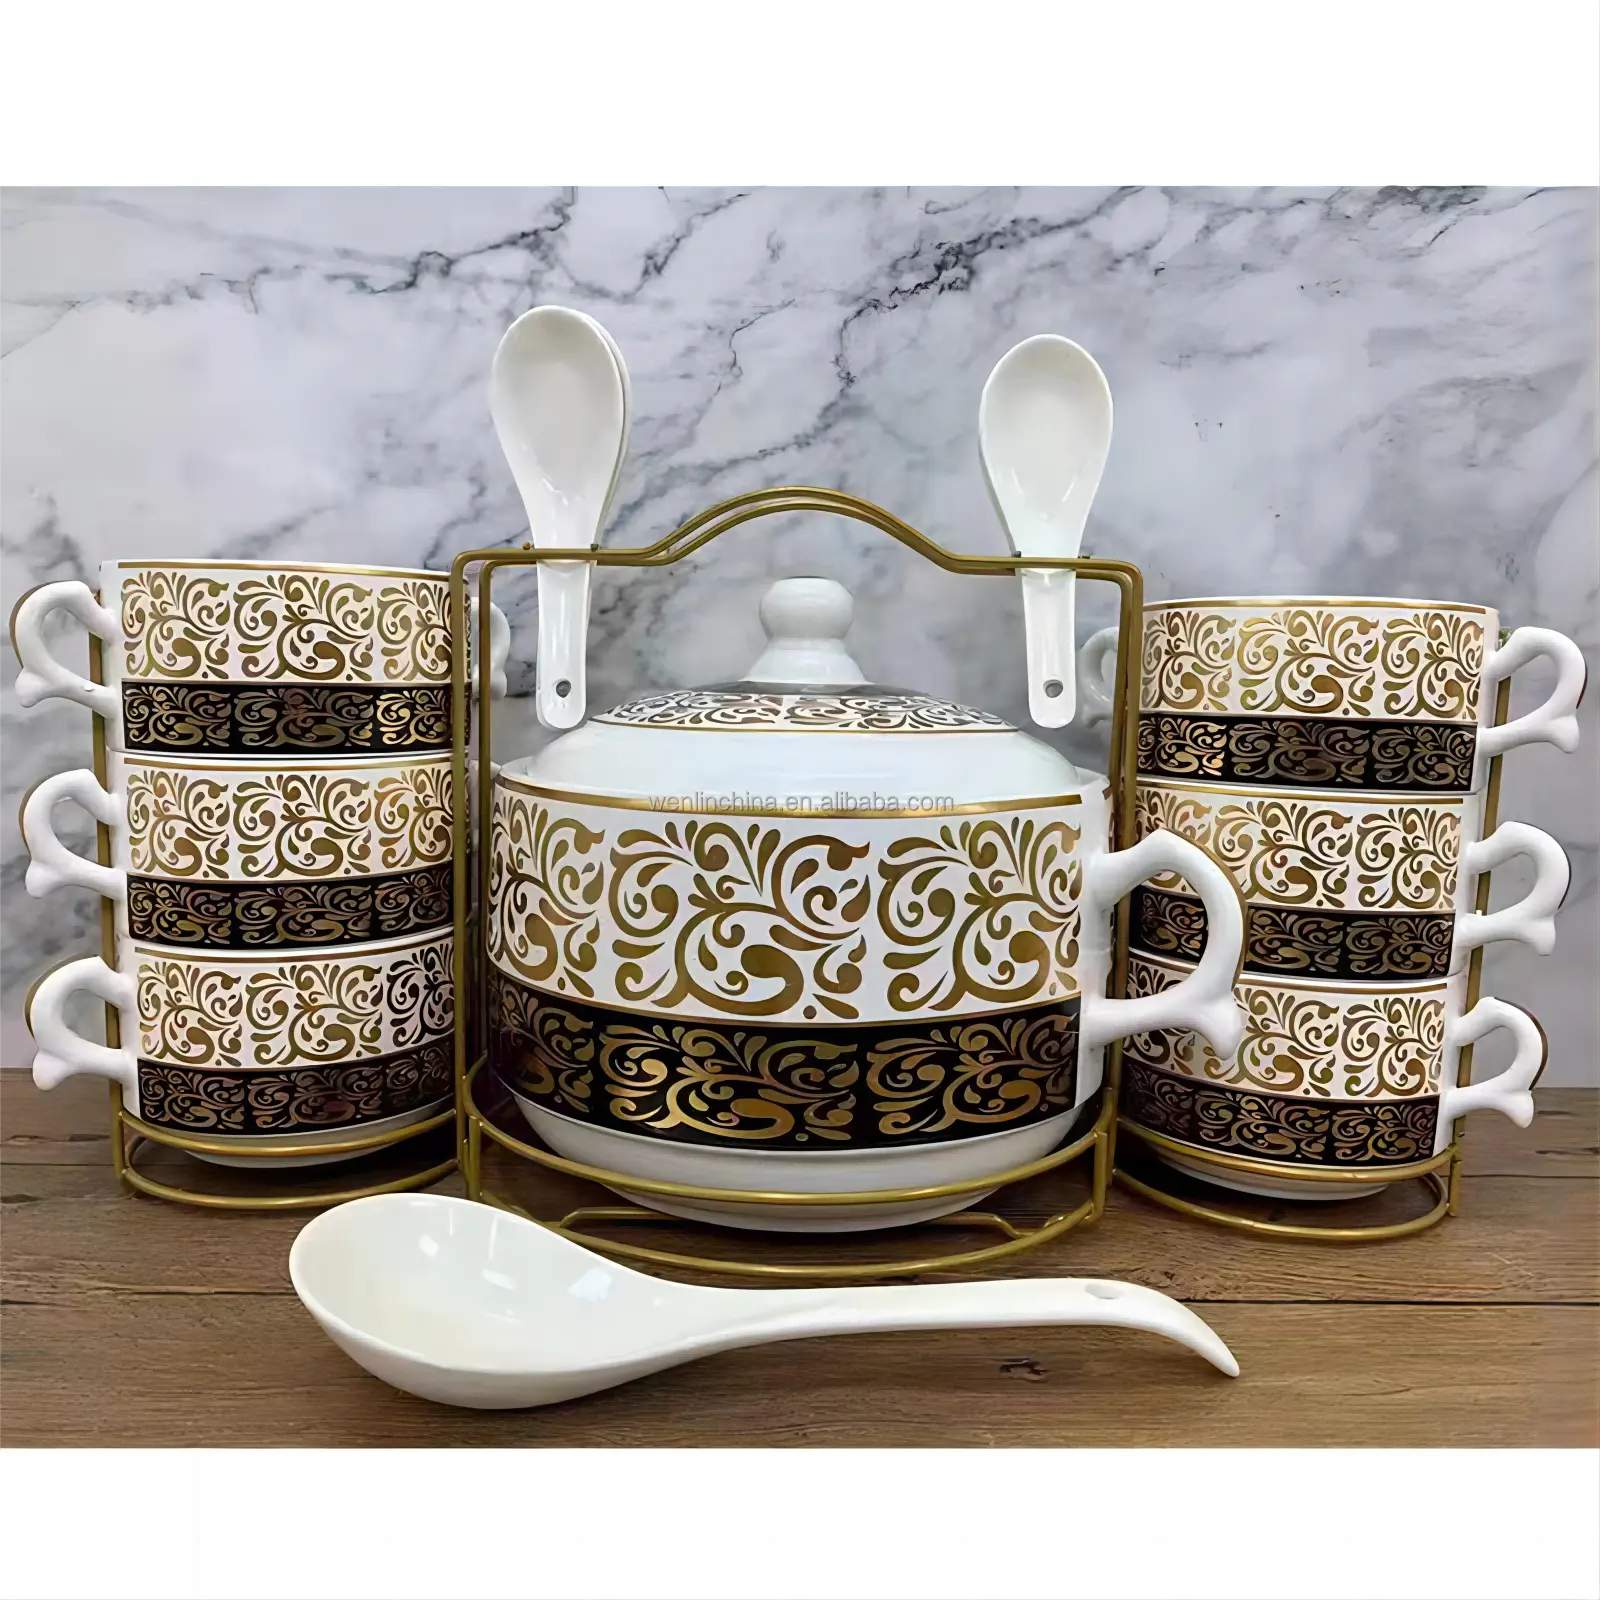 Morocco middle east style SOUP DINNER set 16pcs tureen pot with soup bowl & big spoon high white quality porcelain ODM/OEM